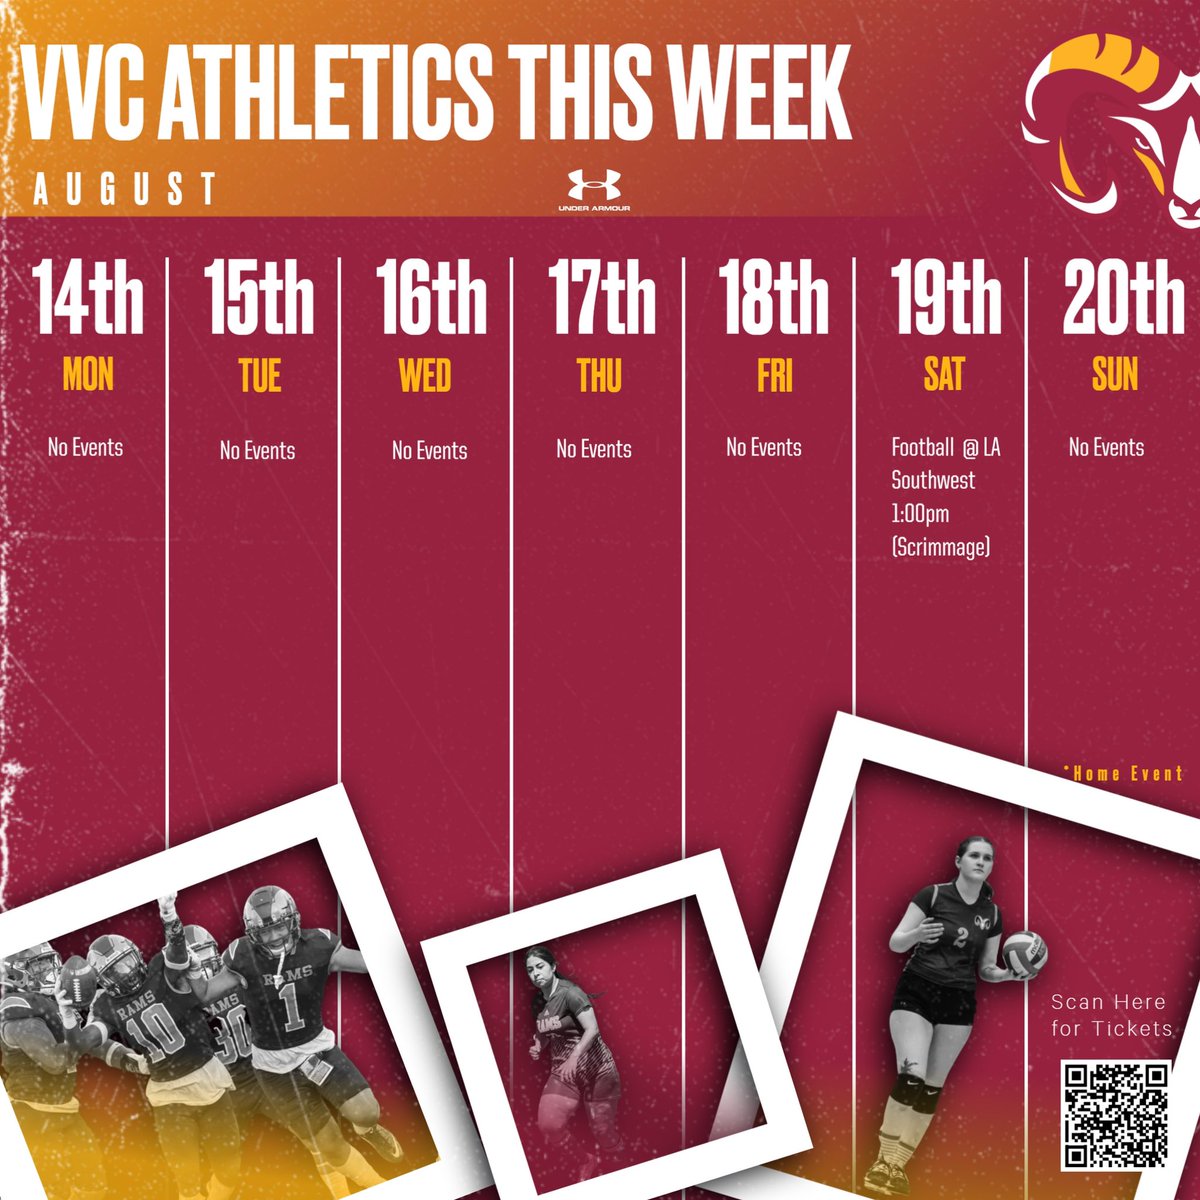 It’s time for @vvcathletics to begin our fall sports season! Take a look at our first week of athletic events with football kicking off the season with a scrimmage at LA Southwest College this Saturday. . . . #VVC I #Athletic I #RAMS I #vvcathletics | #GoRams I #GoVVC I #HornsUp